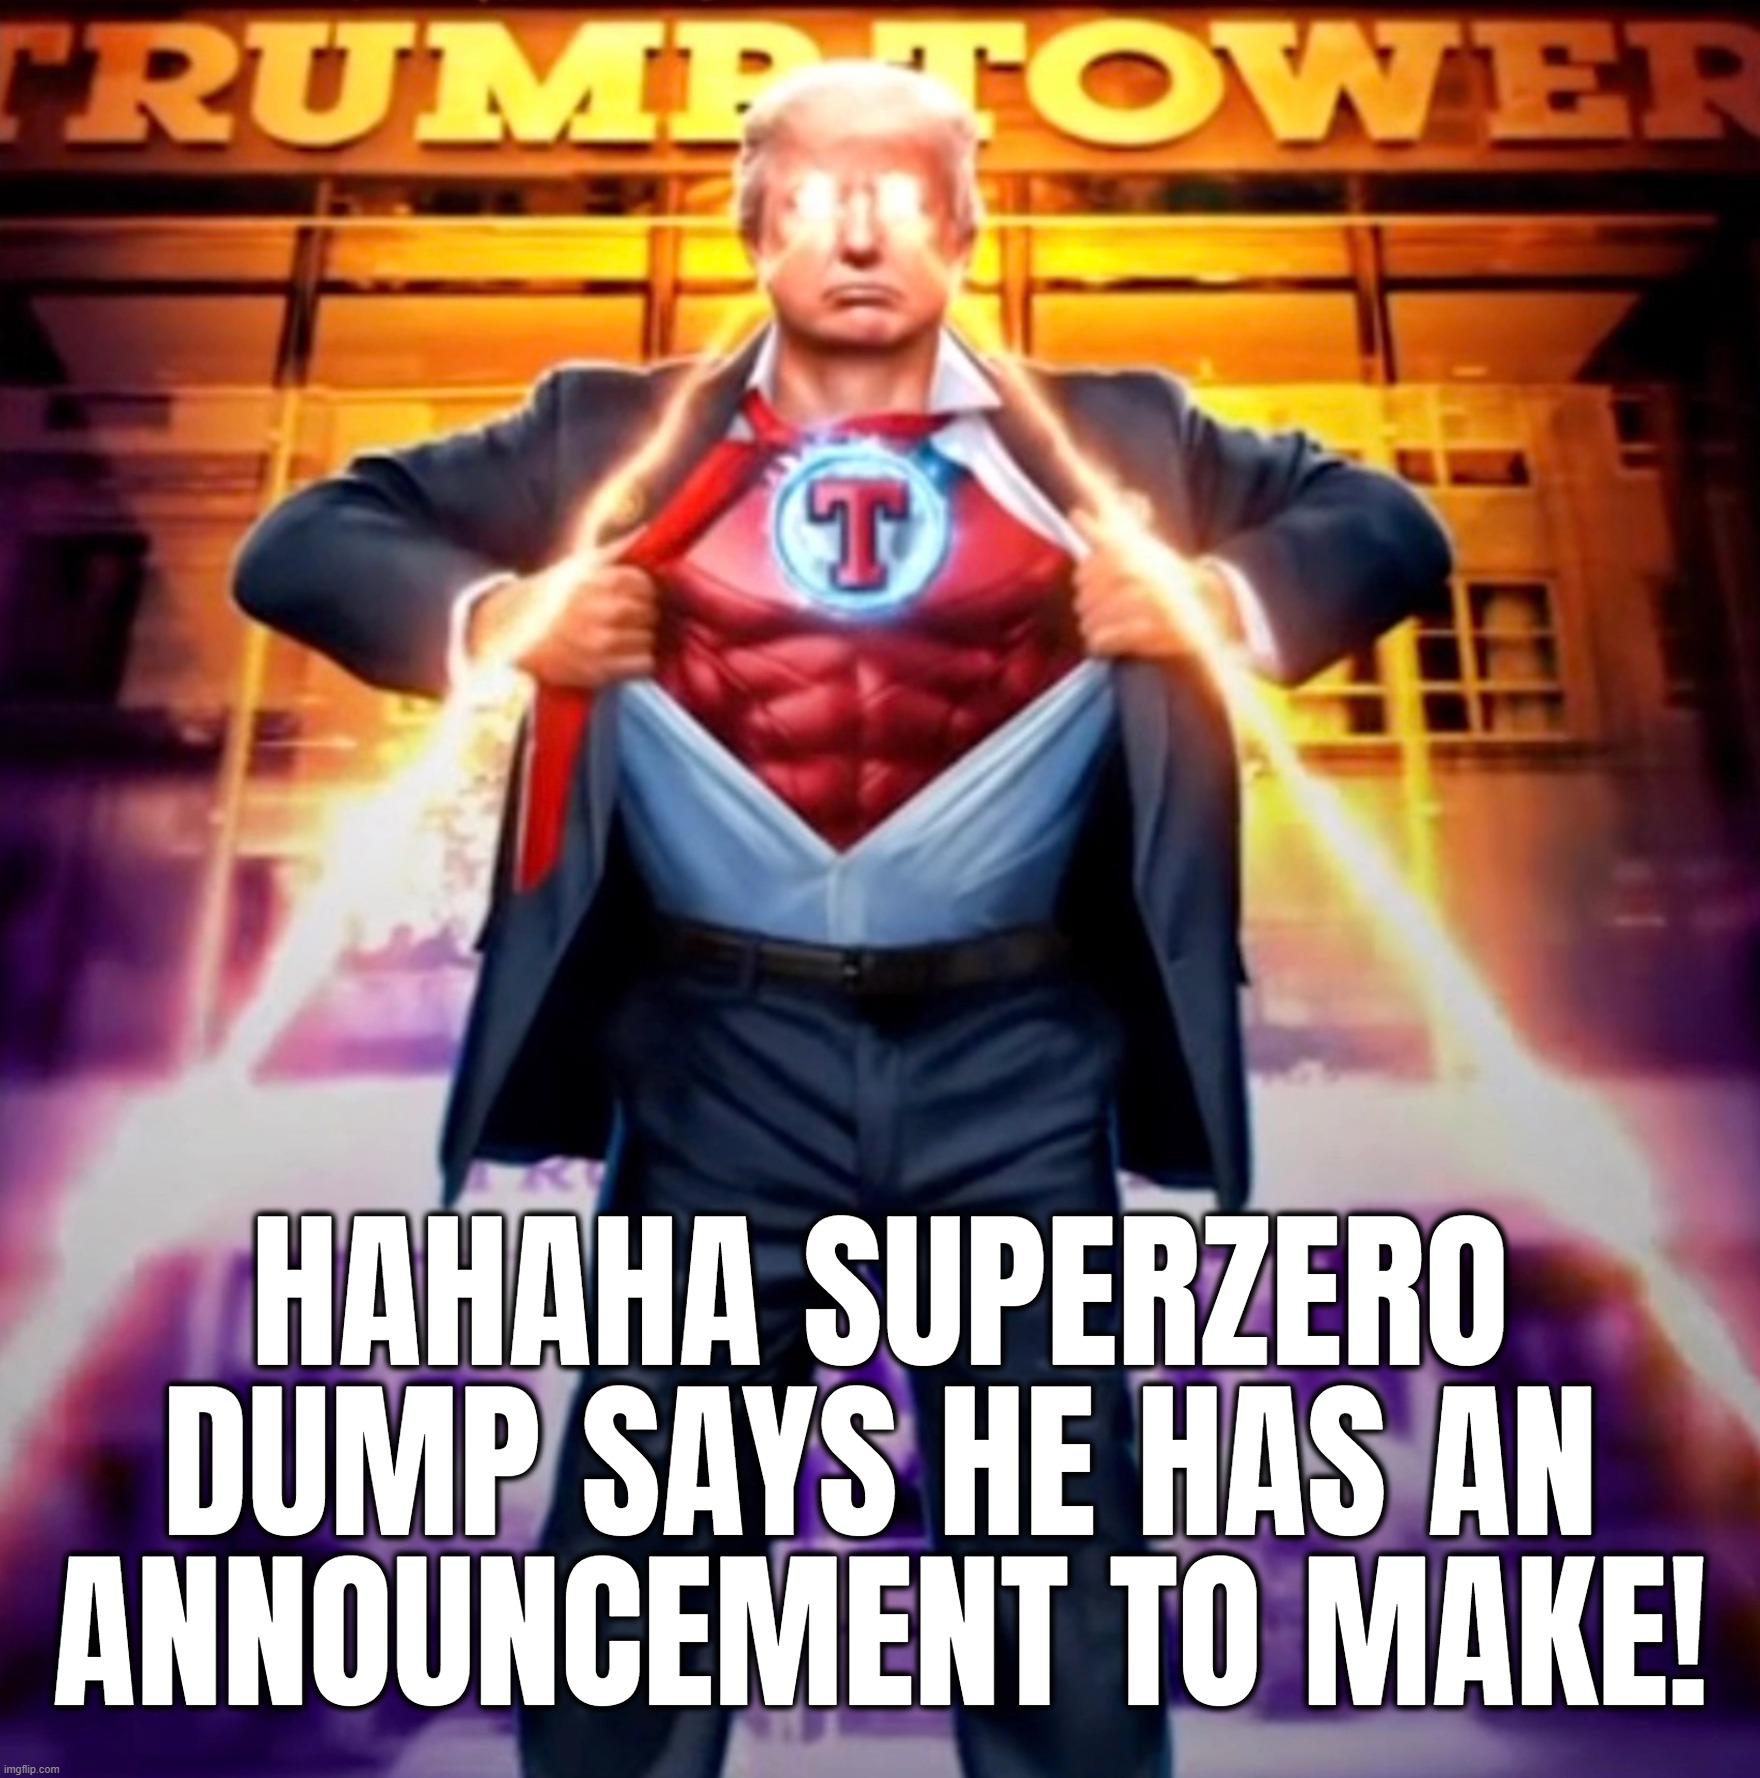 SUPERZERO DUMP | HAHAHA SUPERZERO DUMP SAYS HE HAS AN ANNOUNCEMENT TO MAKE! | image tagged in delusional,malignant narcissist,superbad,superdork,superjail | made w/ Imgflip meme maker